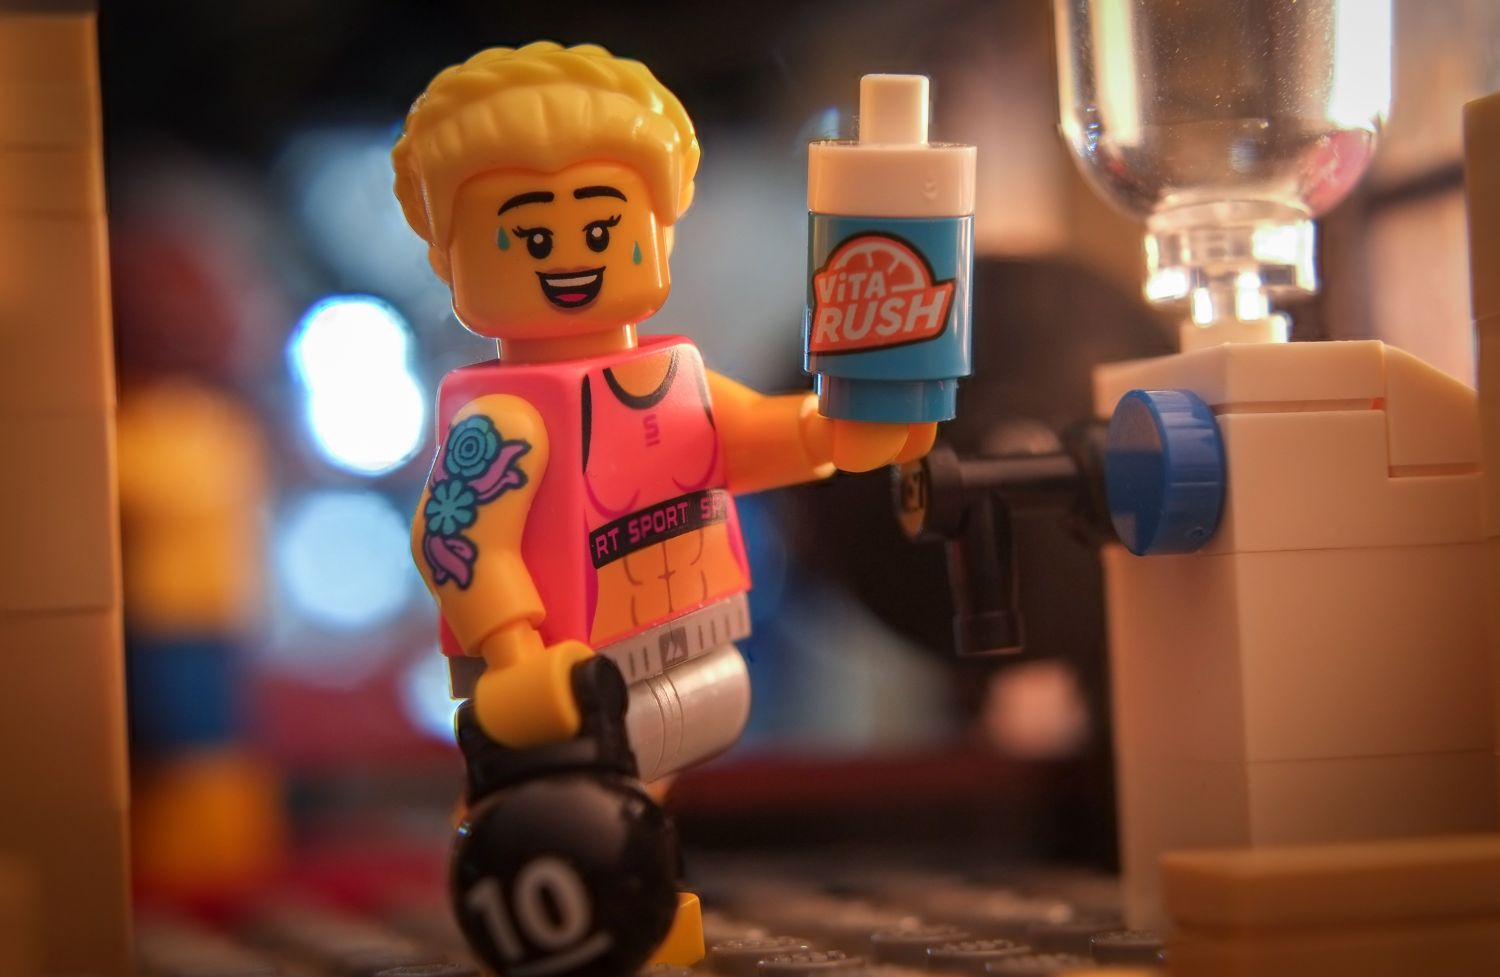 A LEGO Fitness Instructor holding a kettlebell and VIta Rush cup.